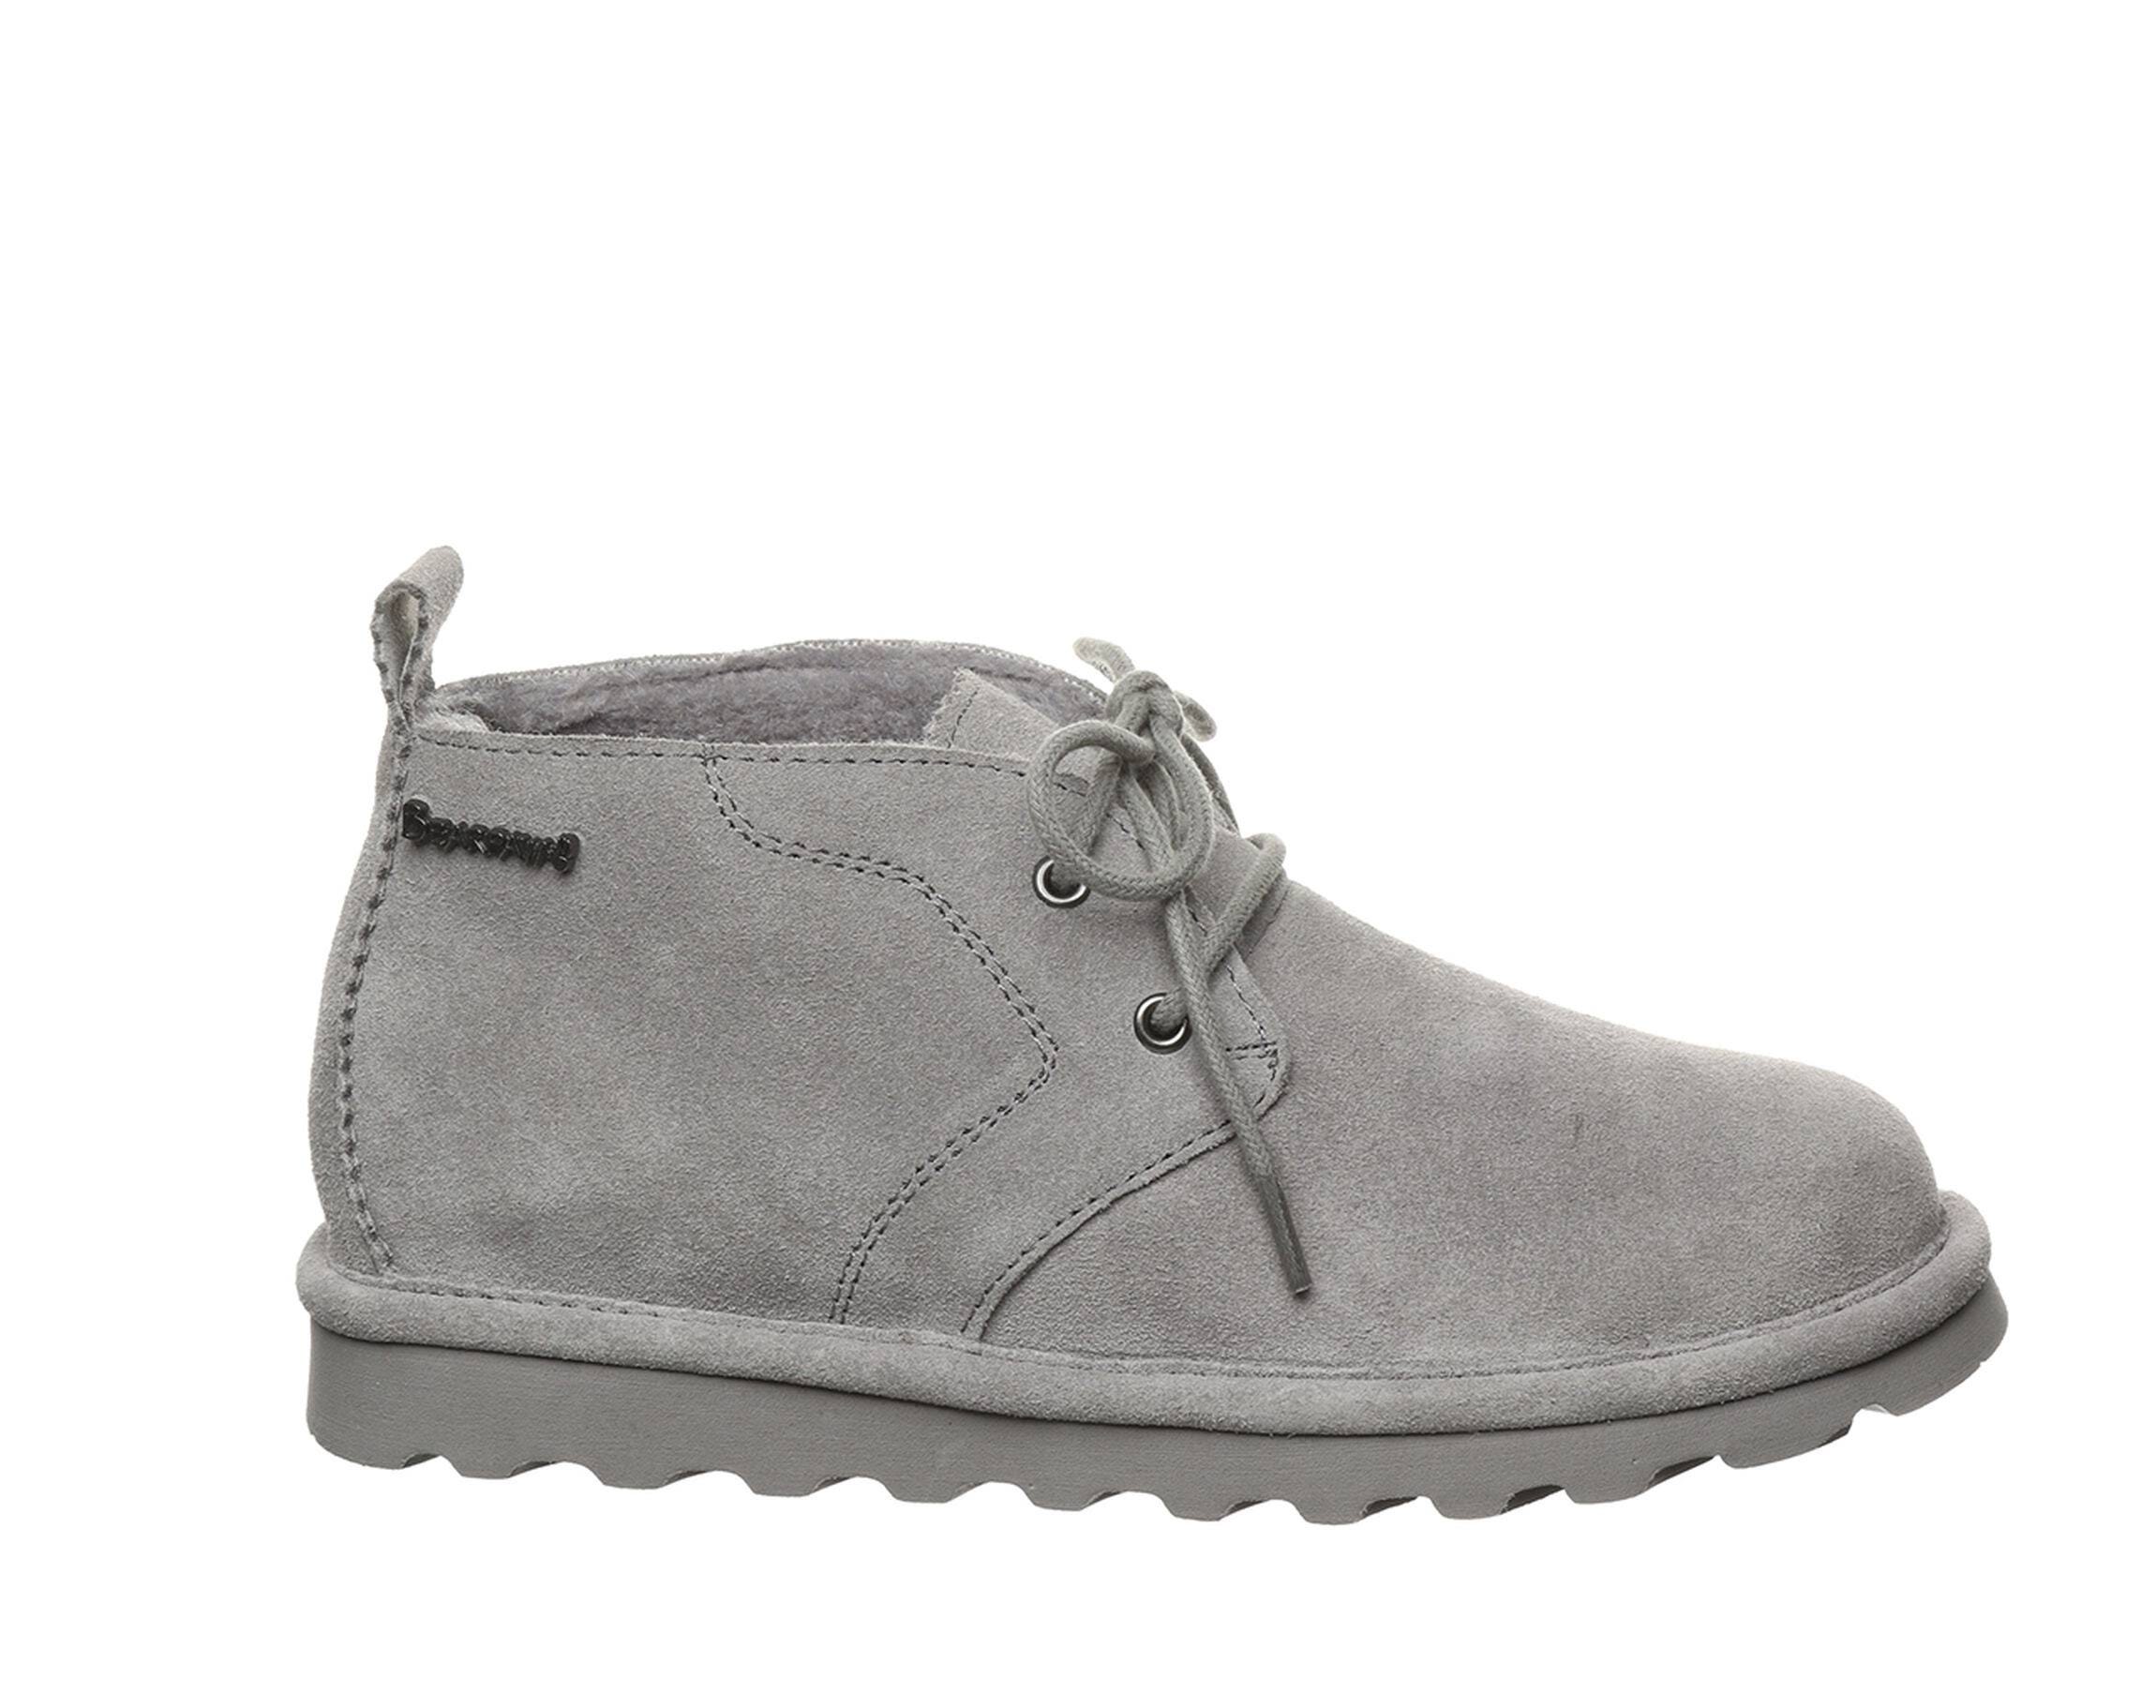 Ultra-Cozy Womens Grey Suede Boots with NeverWet Protection | Image